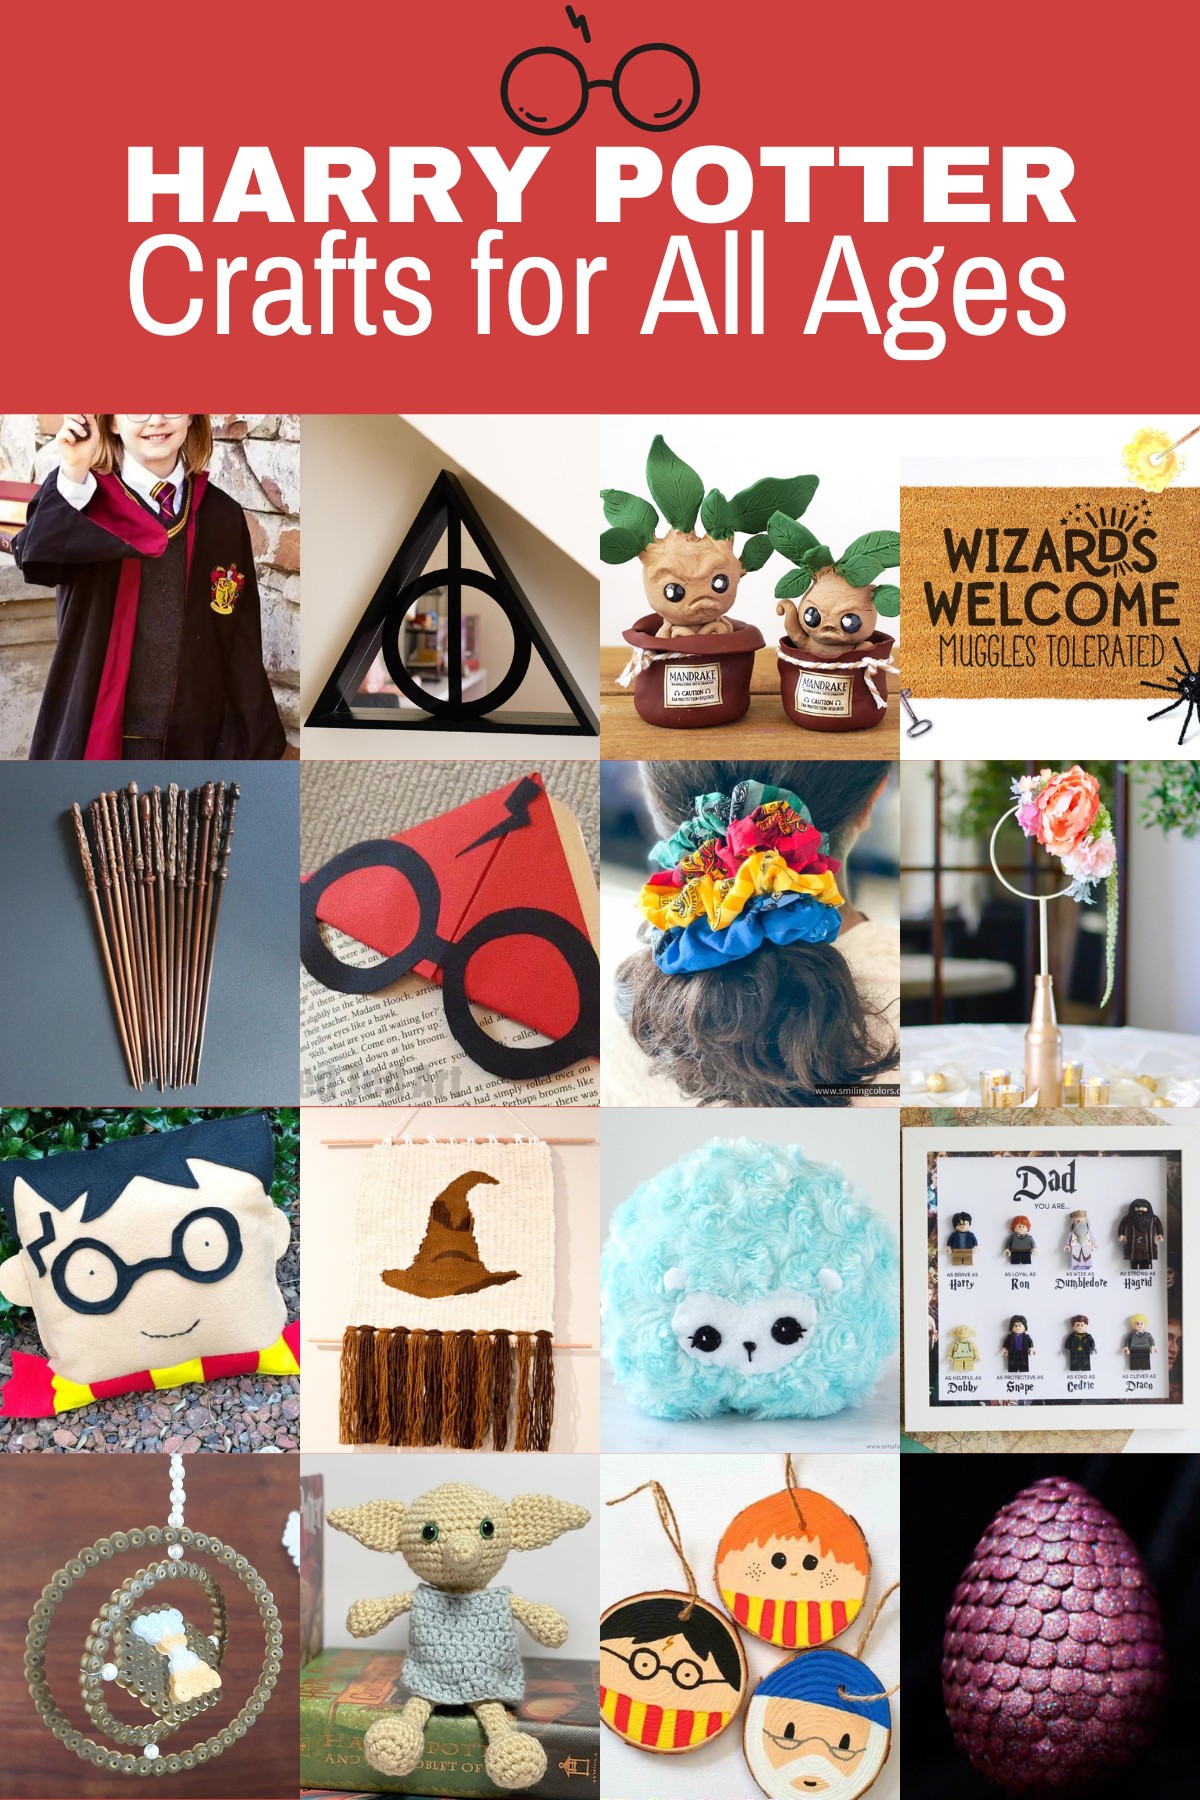 Harry Potter Crafts for All Ages